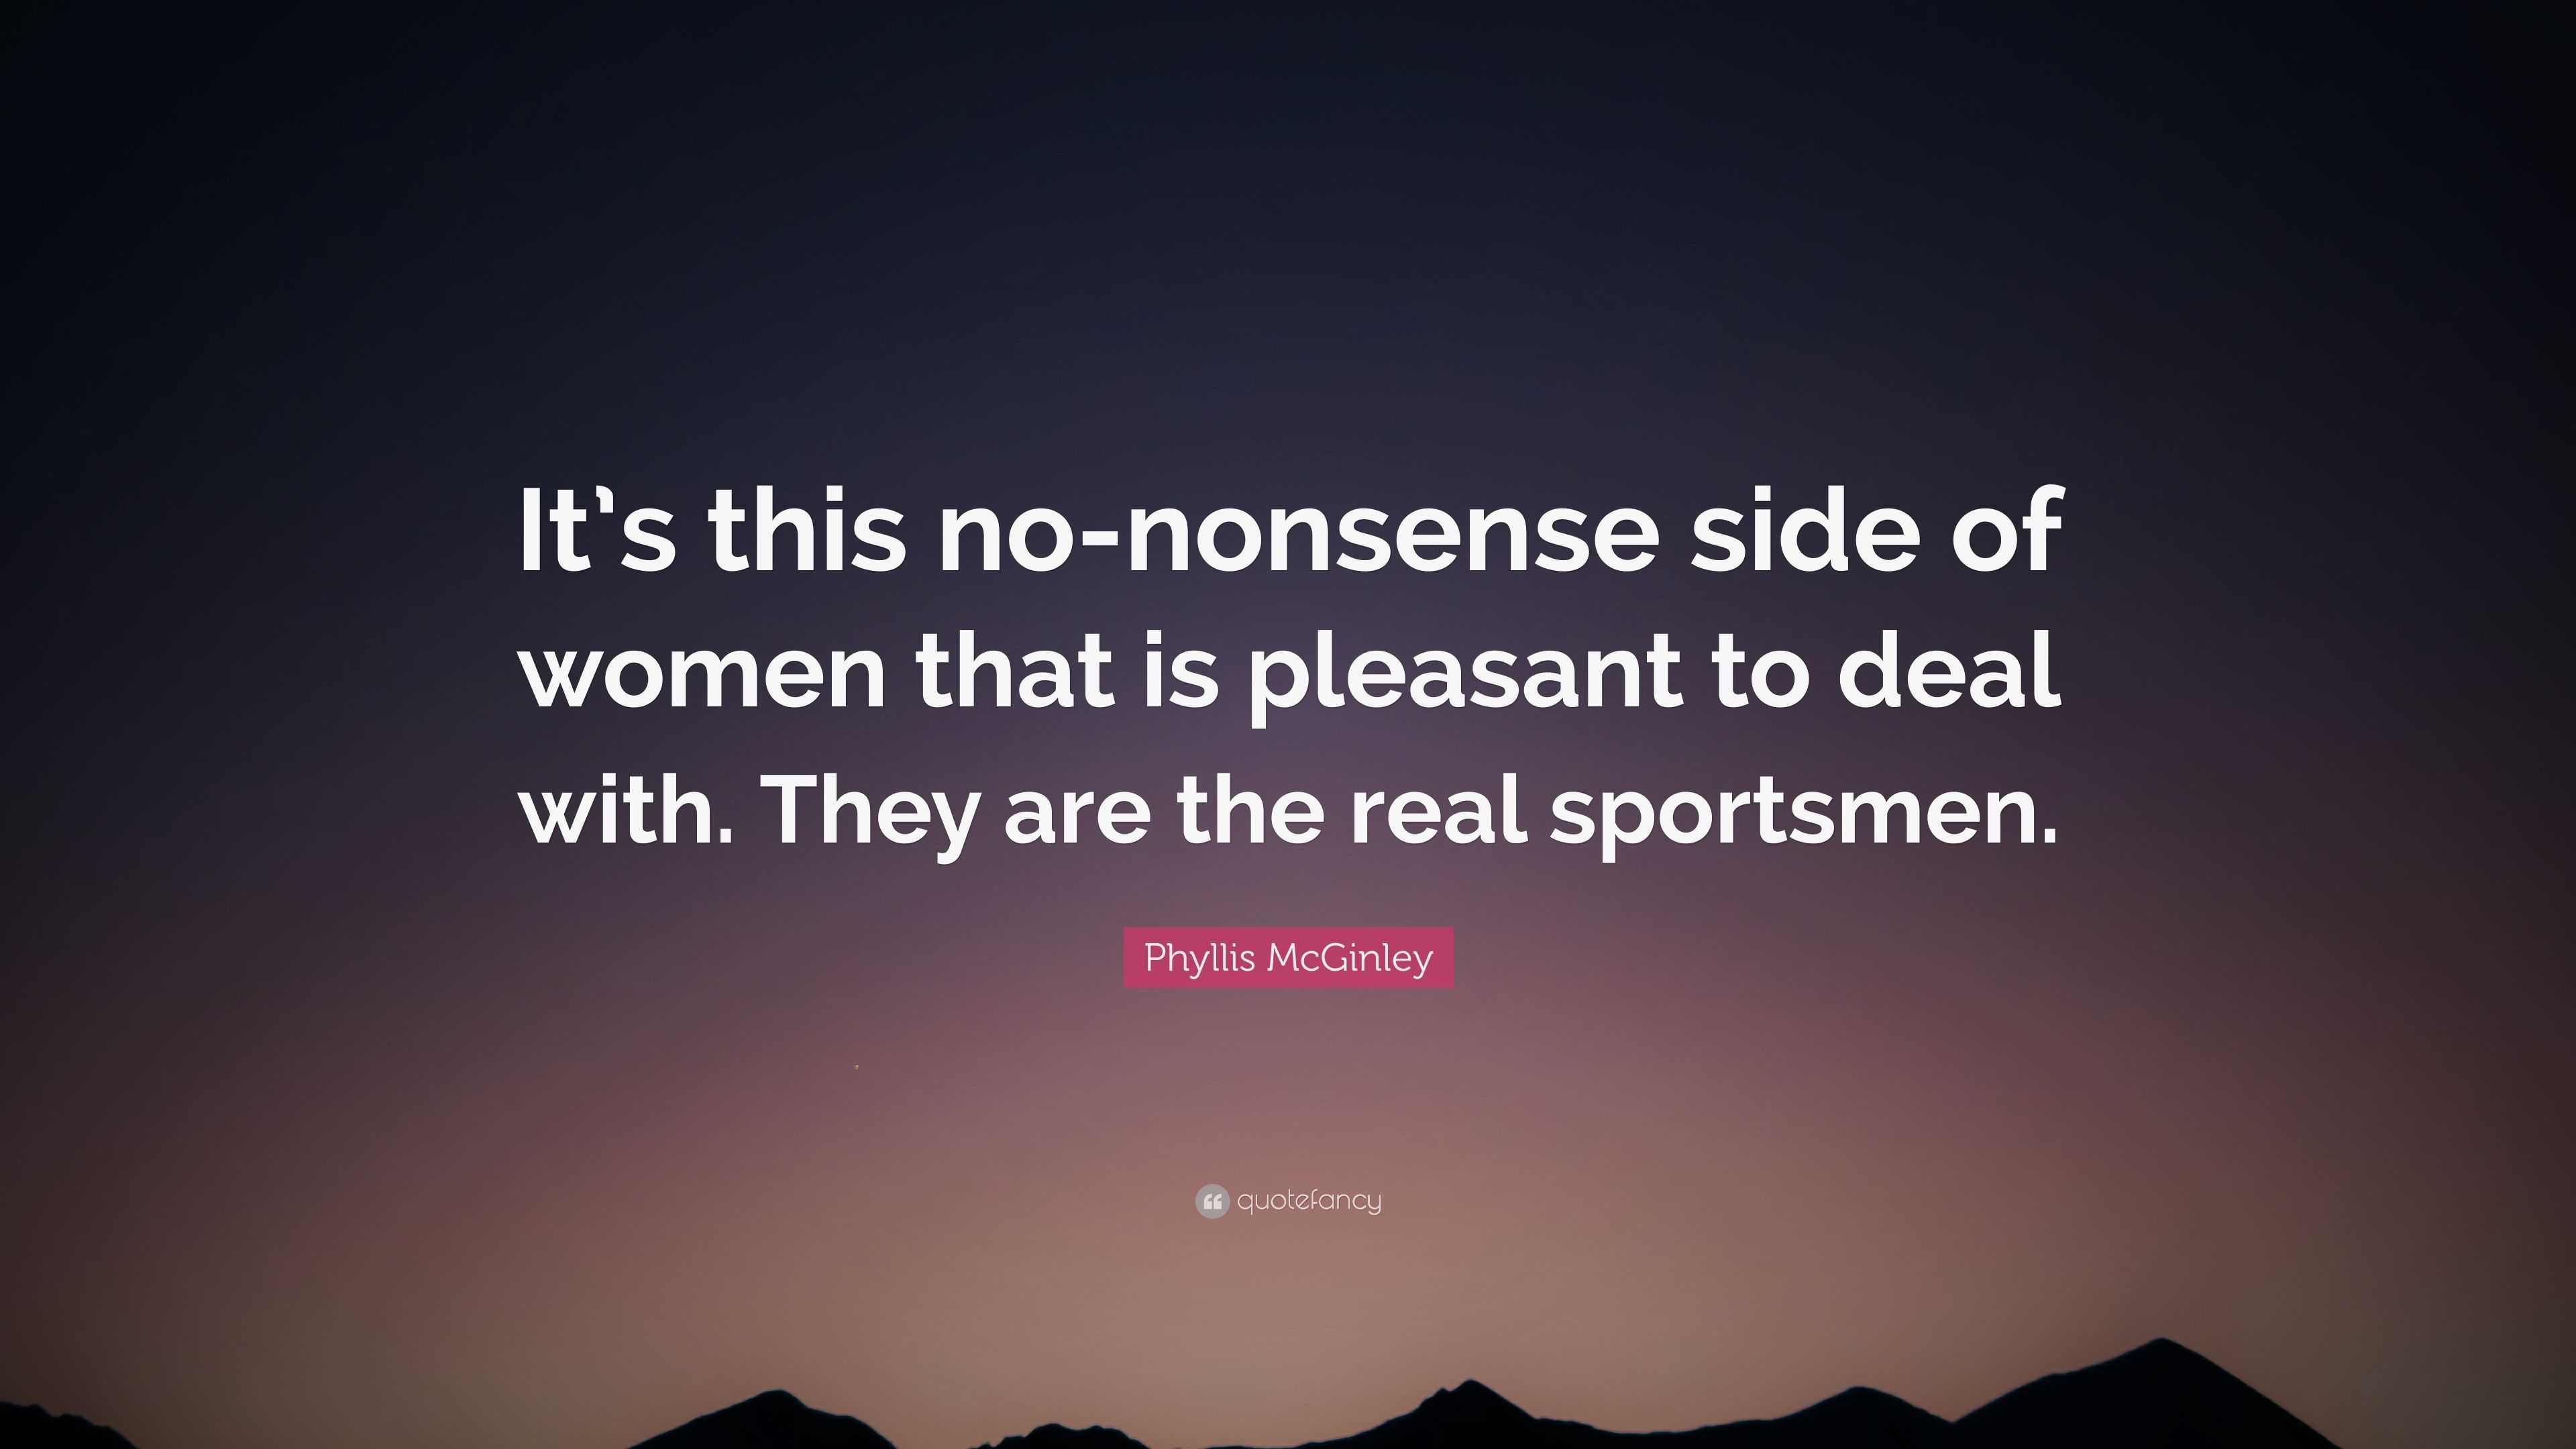 Phyllis McGinley Quote: “It's this no-nonsense side of women that is  pleasant to deal with.